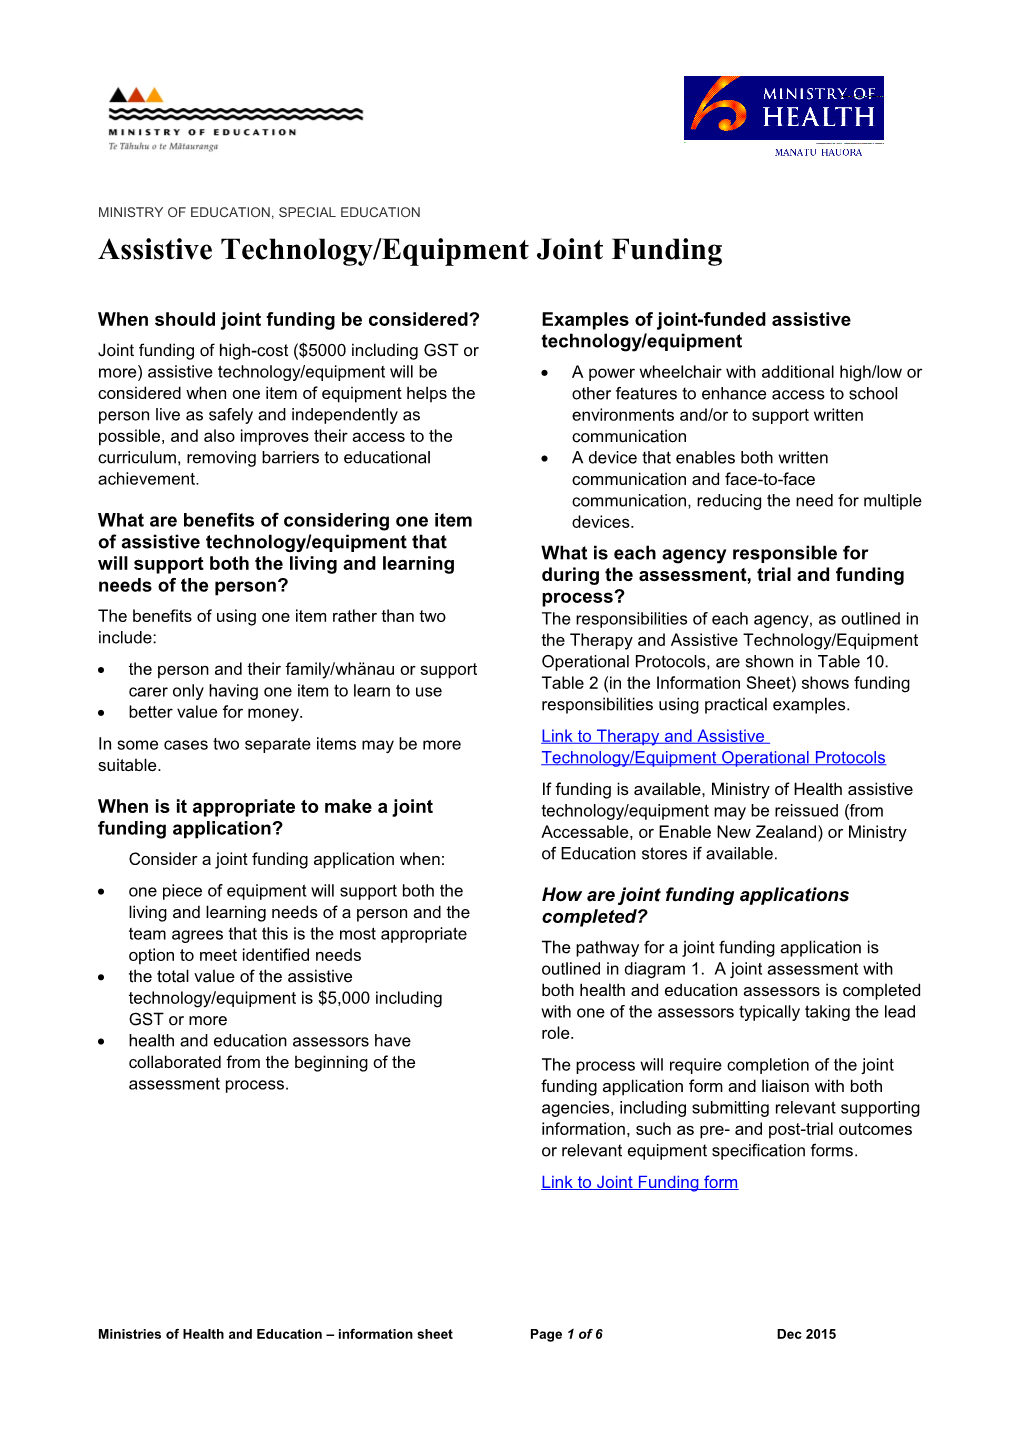 Assistive Technology/Equipment Joint Funding